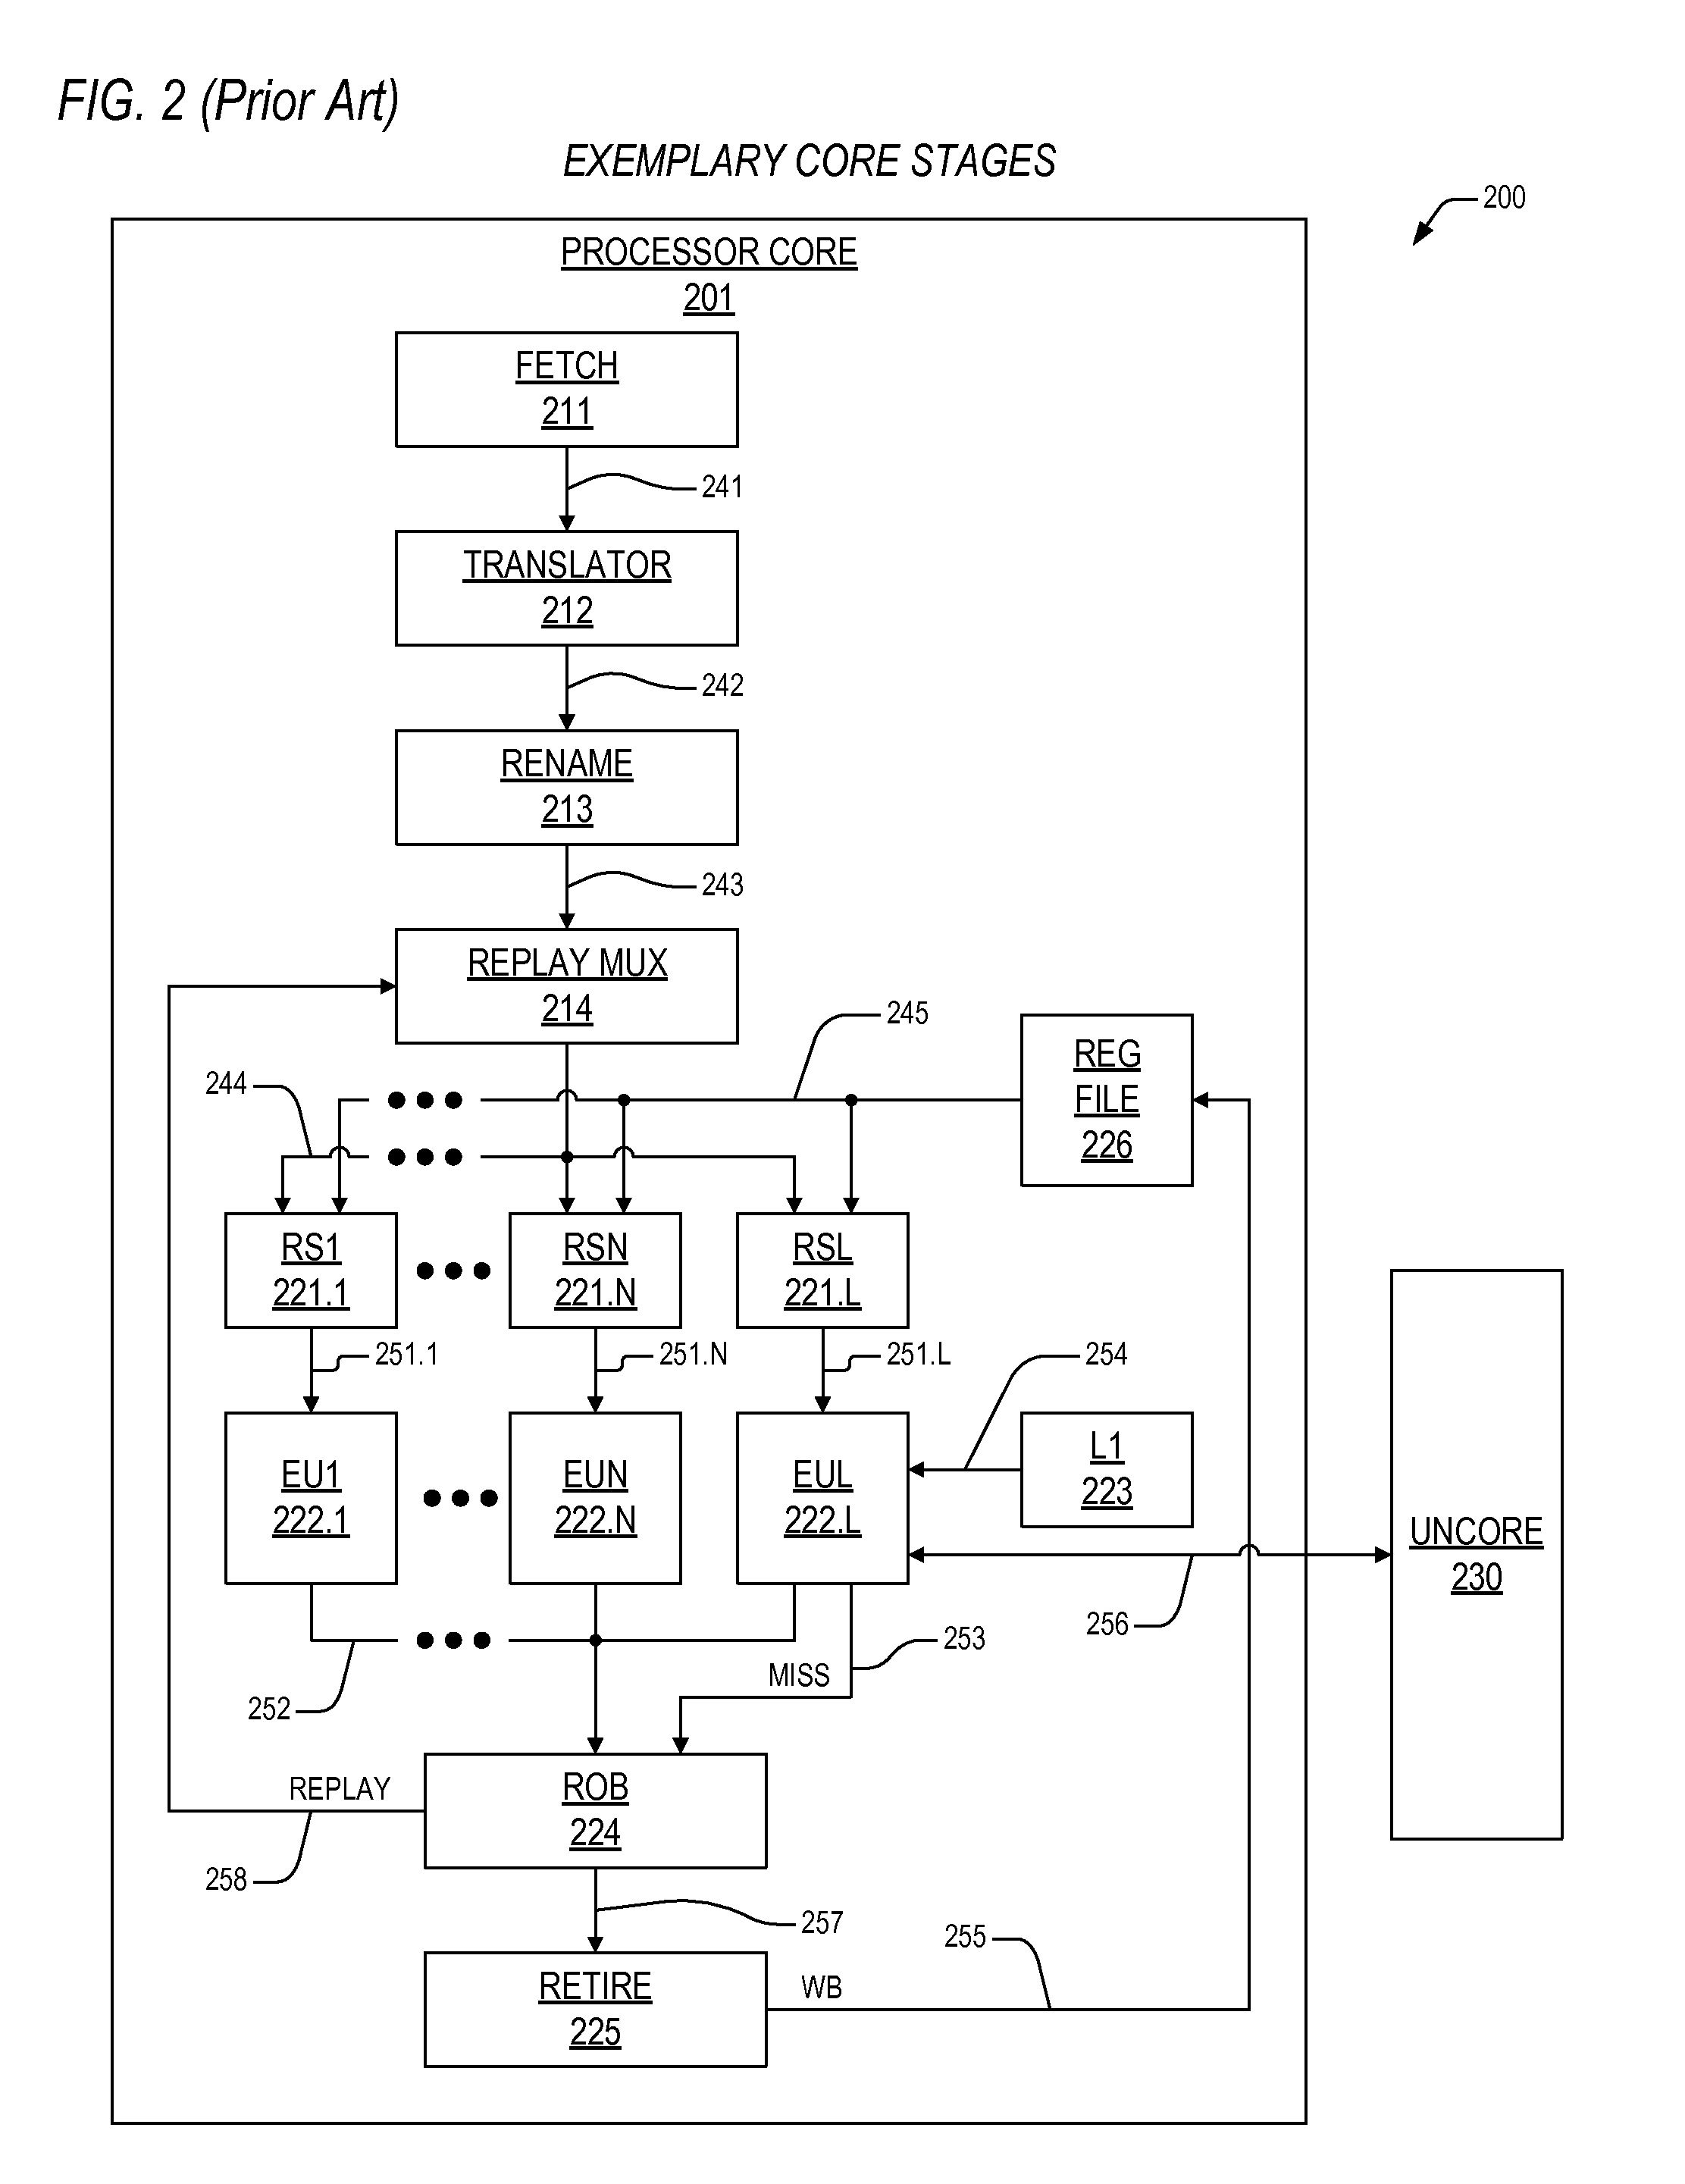 Mechanism to preclude load replays dependent on fuse array access in an out-of-order processor